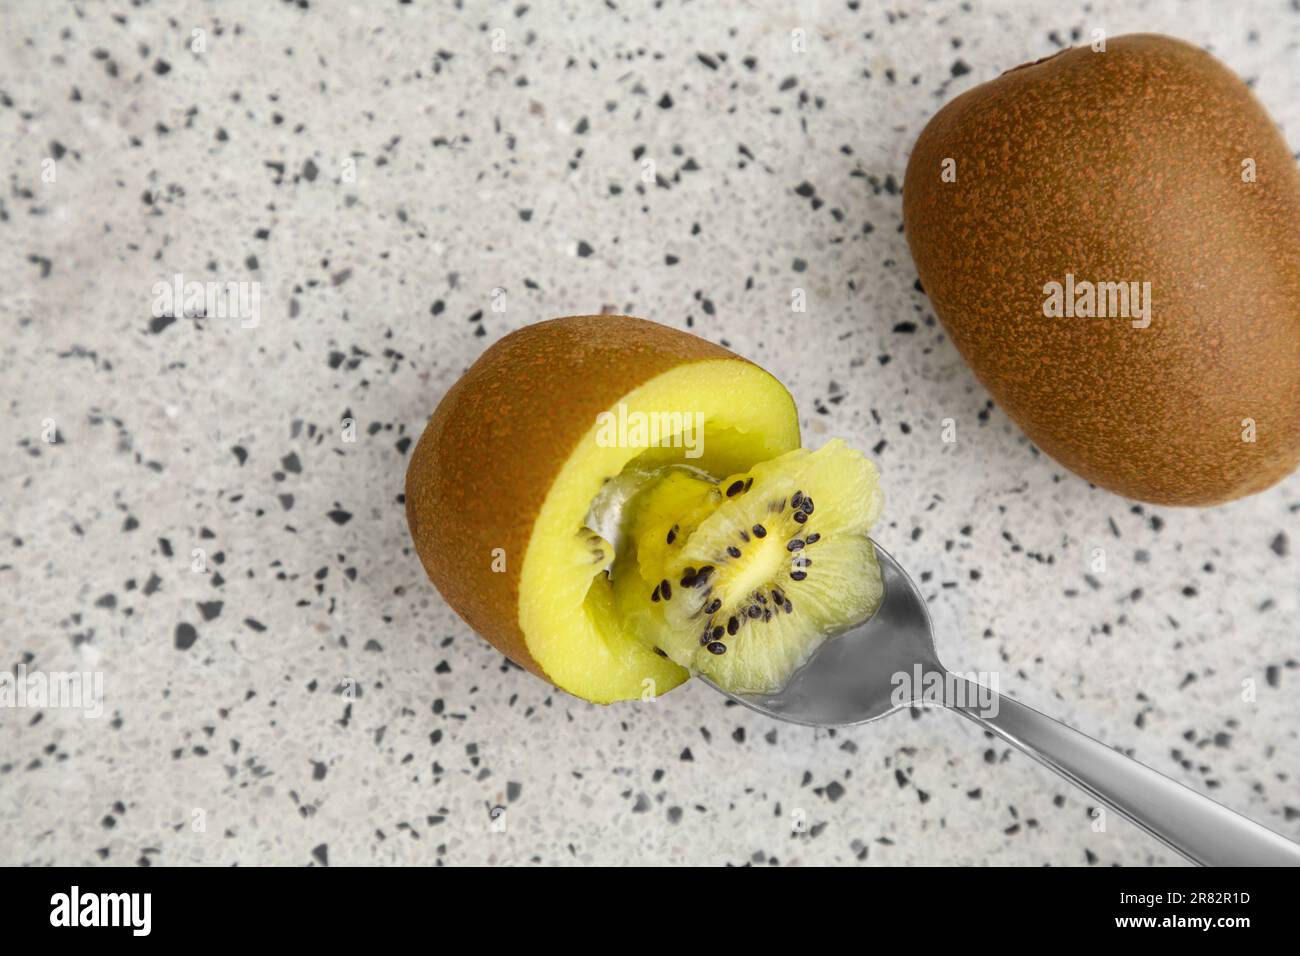 How to Tell If a Kiwi Is Ripe